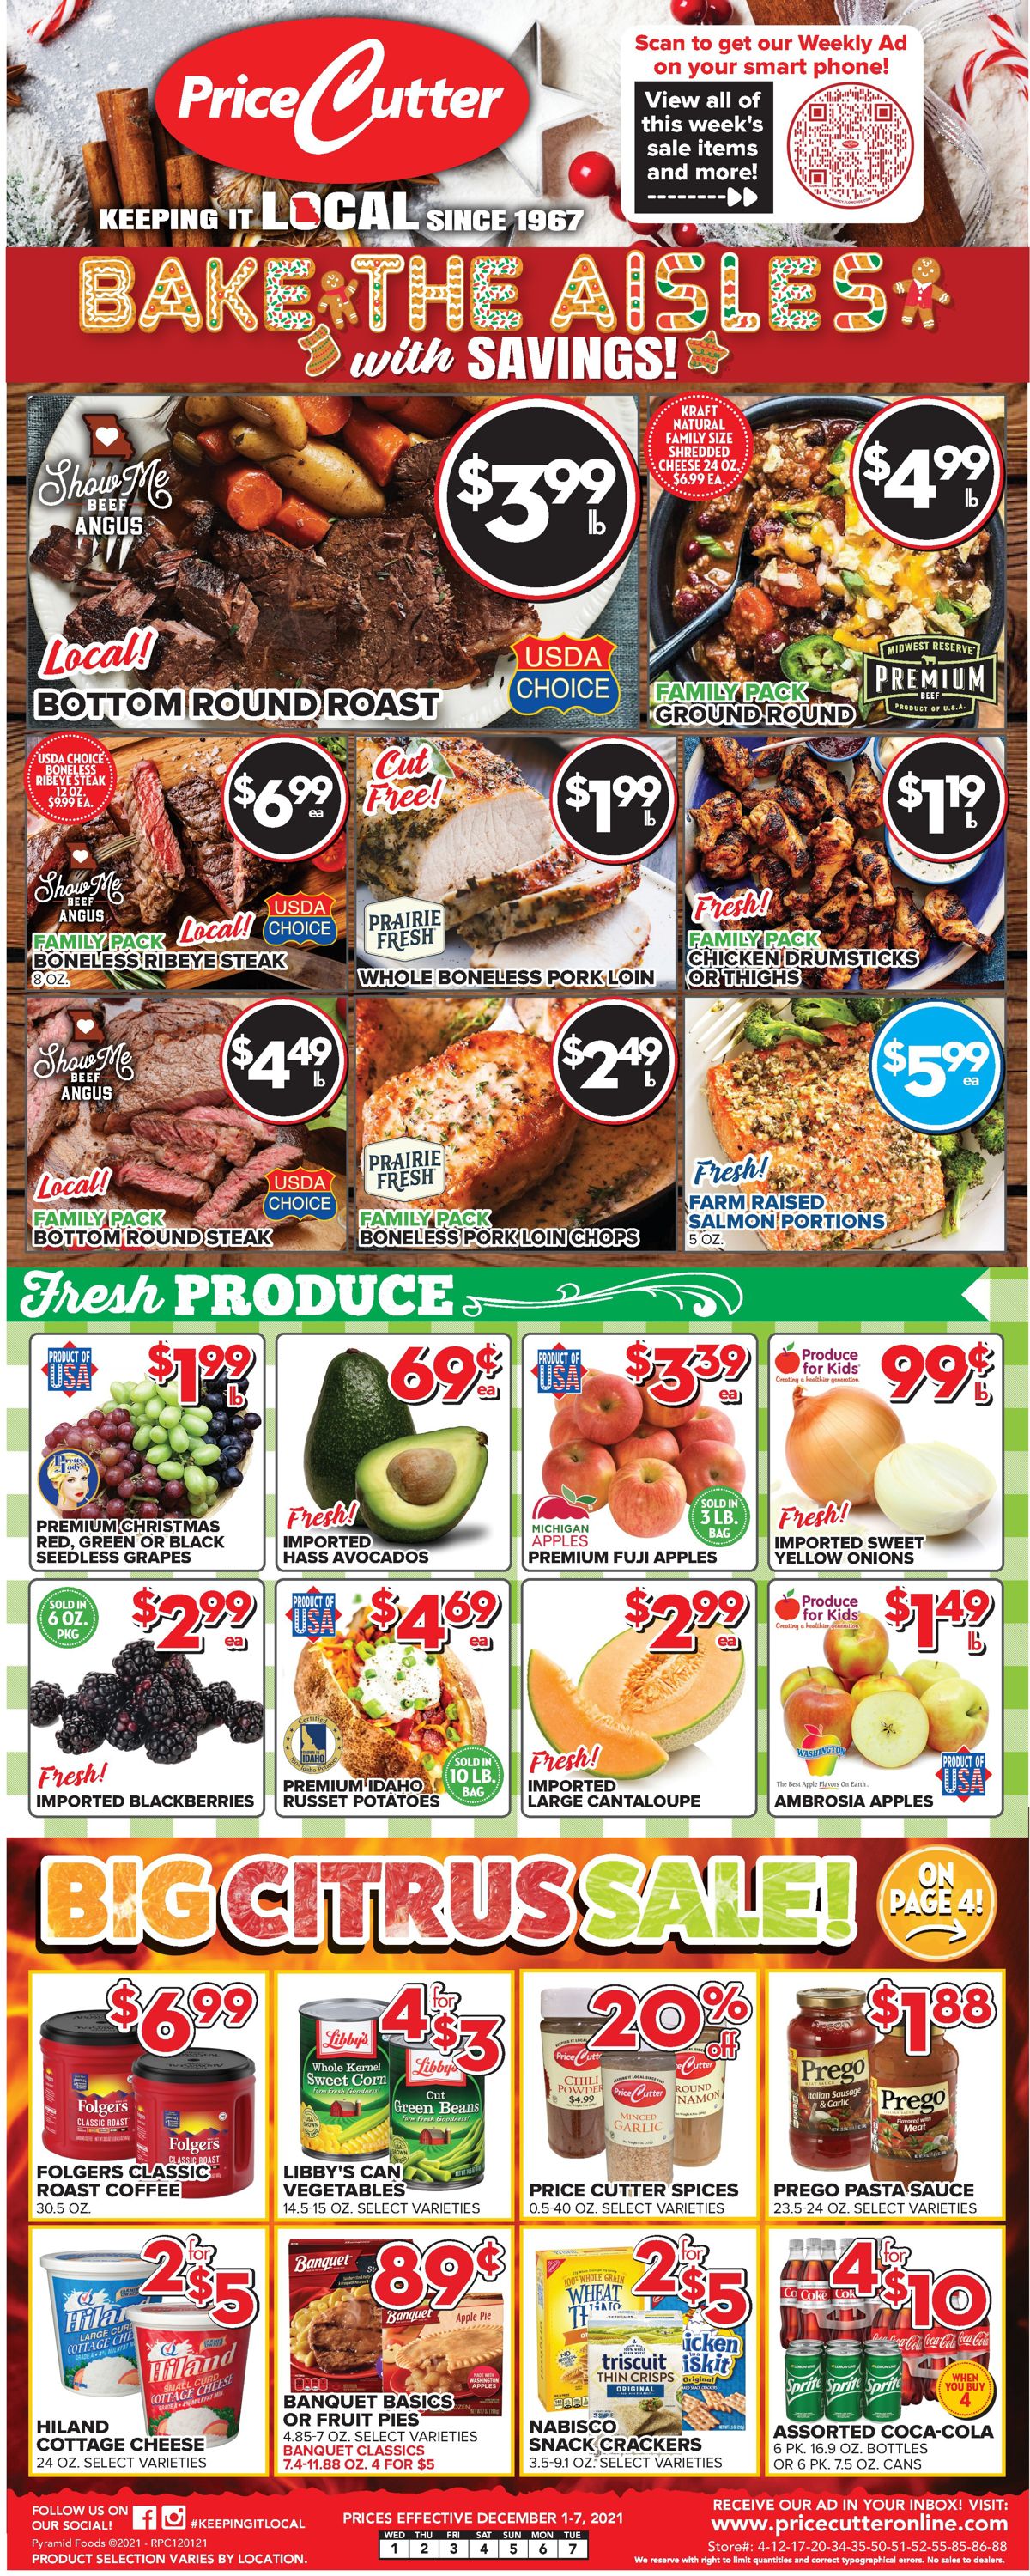 Price Cutter Weekly Ad Circular - valid 12/01-12/07/2021